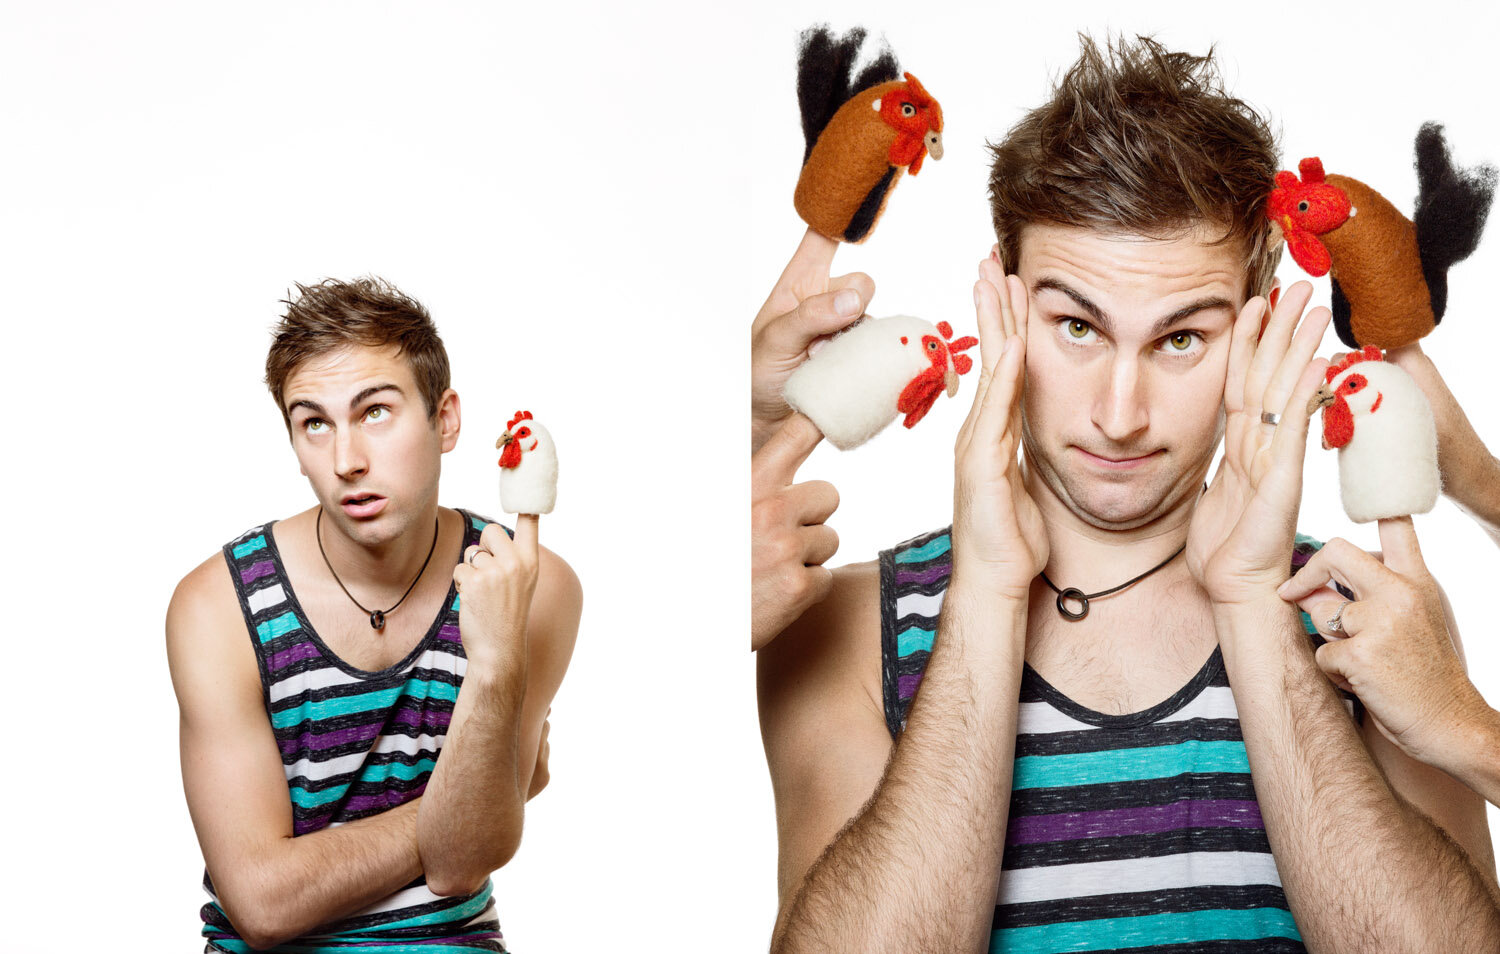 quirky portrait on white of juggler Marcus Monroe being pestered by chicken finger puppets by studio portrait photographer Hanna Agar